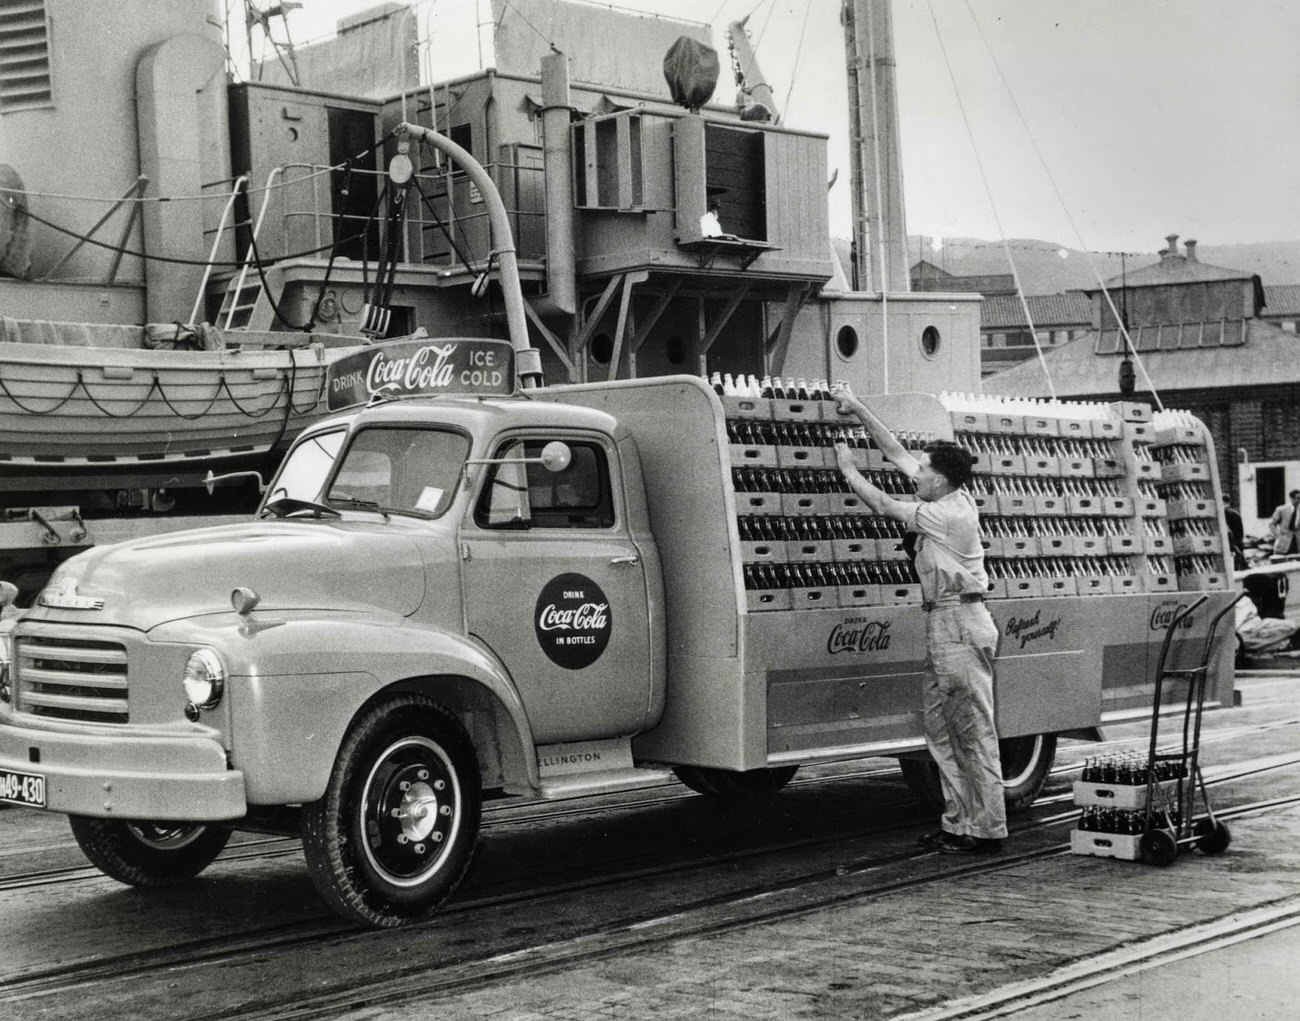 Coca-Cola being loaded onto the Endeavor, New Zealand's Antarctic supply ship, 1957.